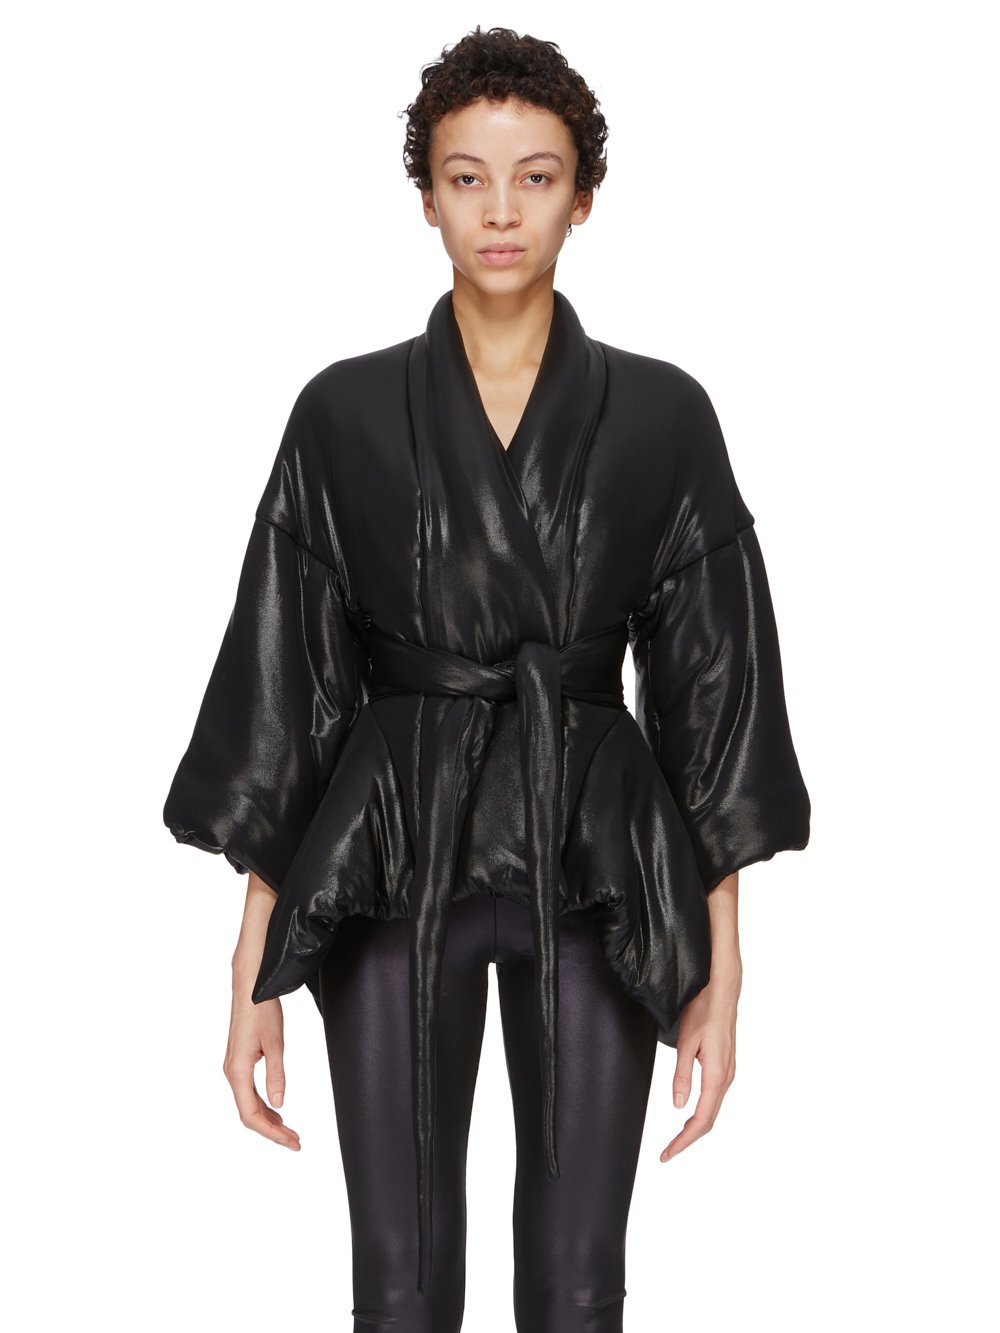 RICK OWENS LILIES FW23 LUXOR TOMMYWING JKT IN BLACK GLOSSY VISCOSE JERSEY